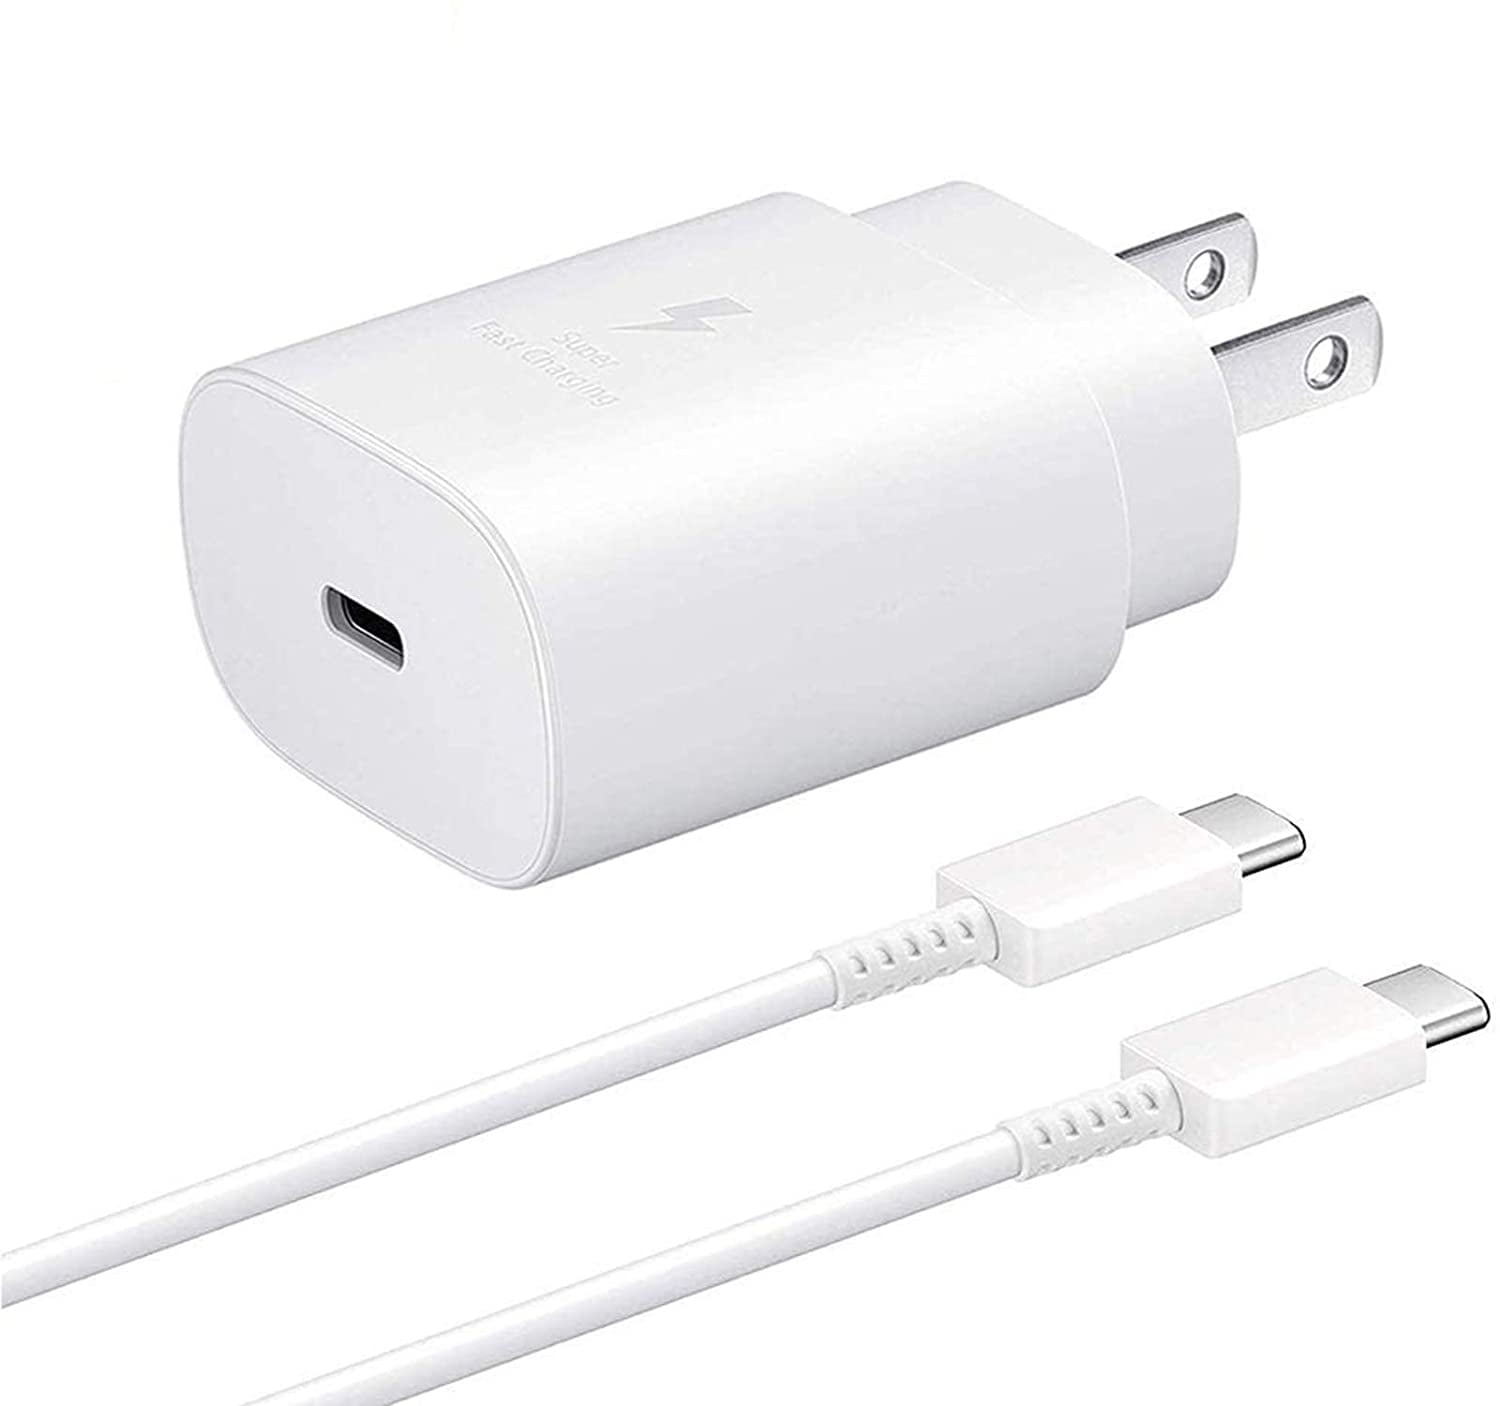 Samsung Galaxy Note20 USB-C Original Super Fast Charging Wall Charger-25W PD Charger Adapter with Type-C Cable - White, Size: One Size